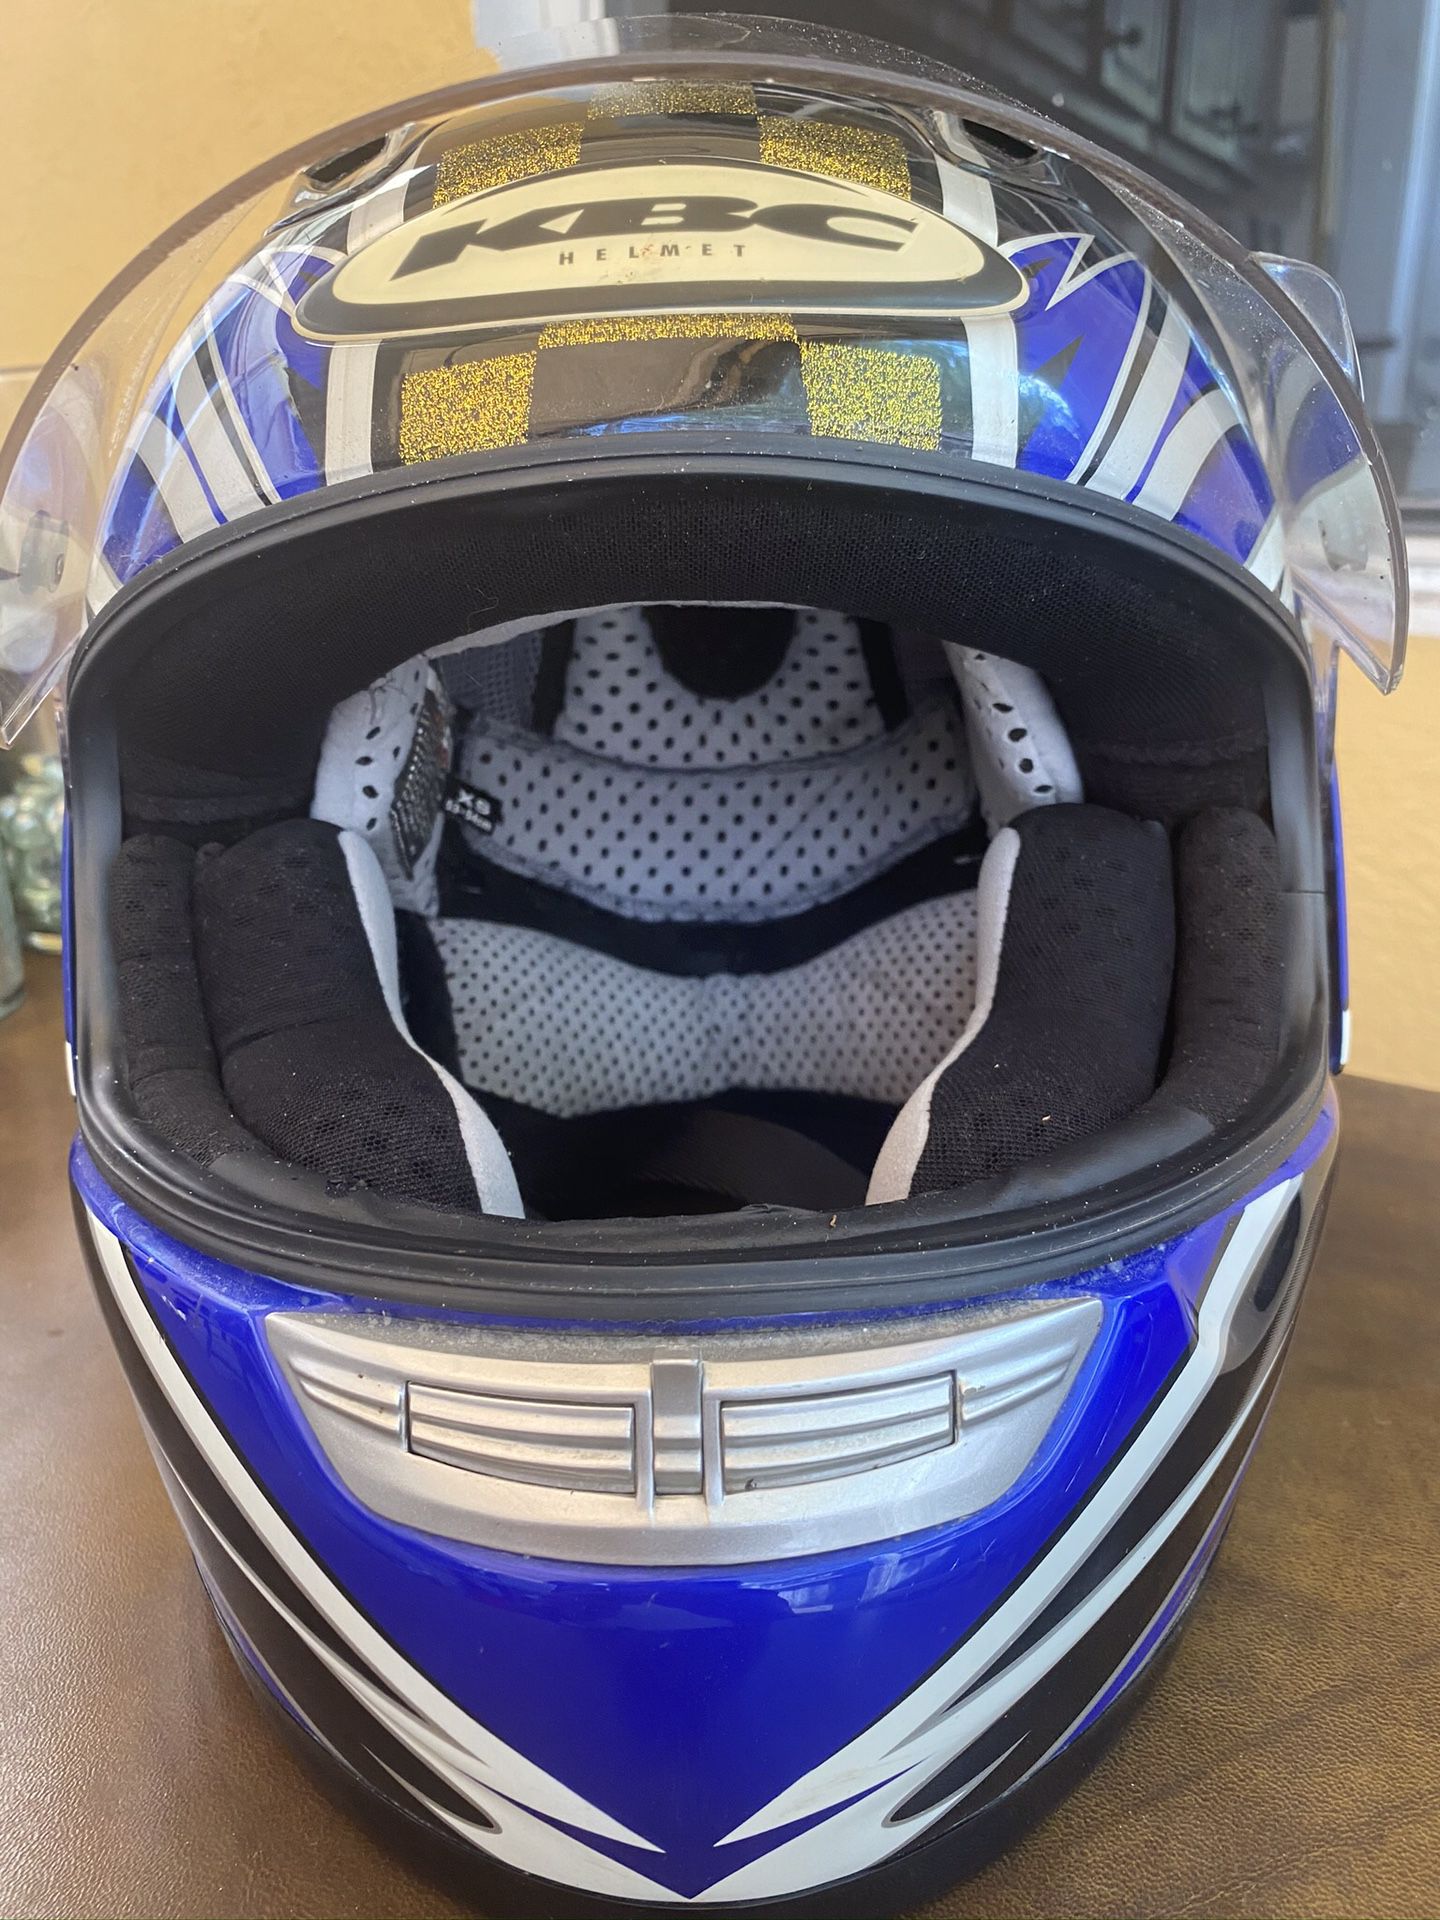 New motorcycle helmets, X-SMALL